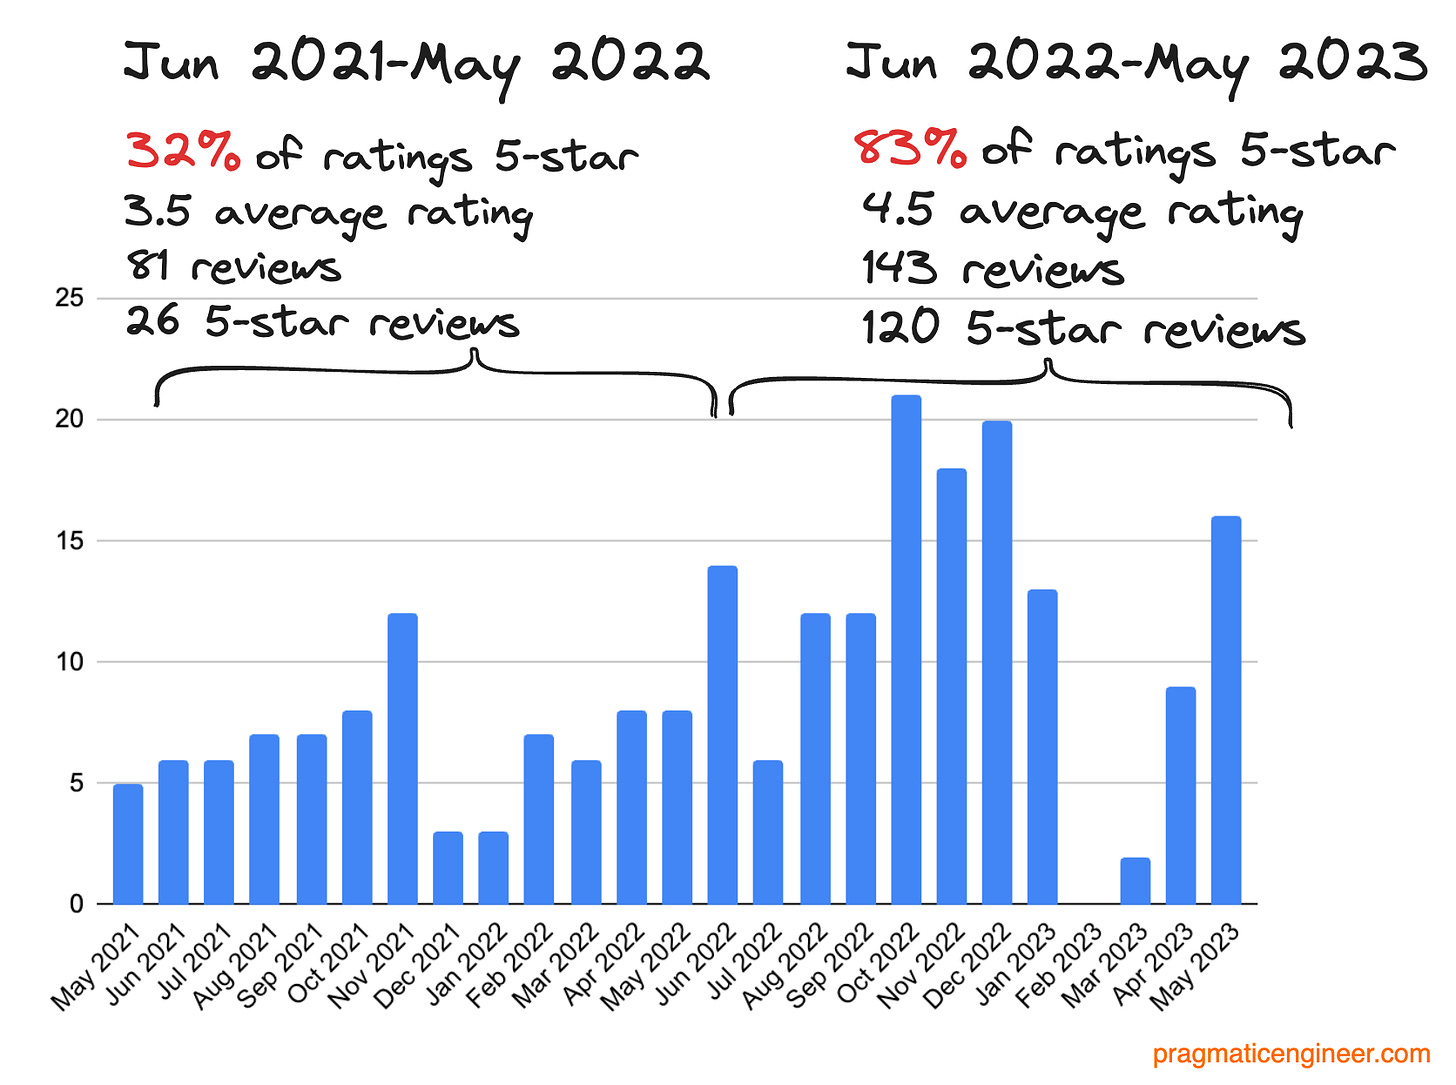 How the frequency and scores across reviews have changed in the last 24 months. The past 12 months there’s been an unprecendented uptick in 5-star reviews